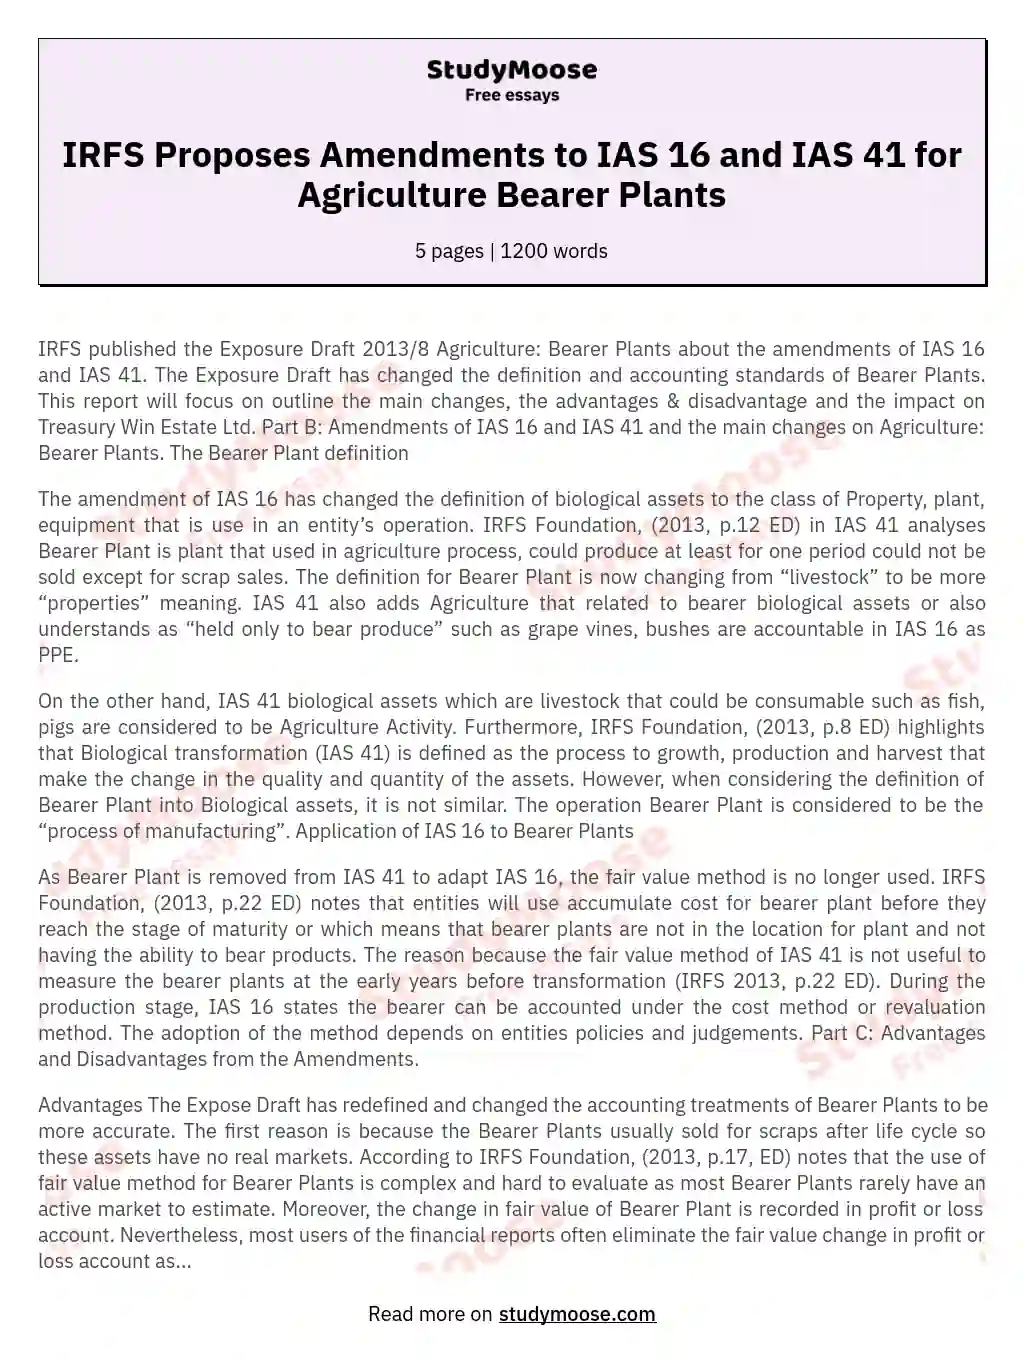 IRFS Proposes Amendments to IAS 16 and IAS 41 for Agriculture Bearer Plants essay